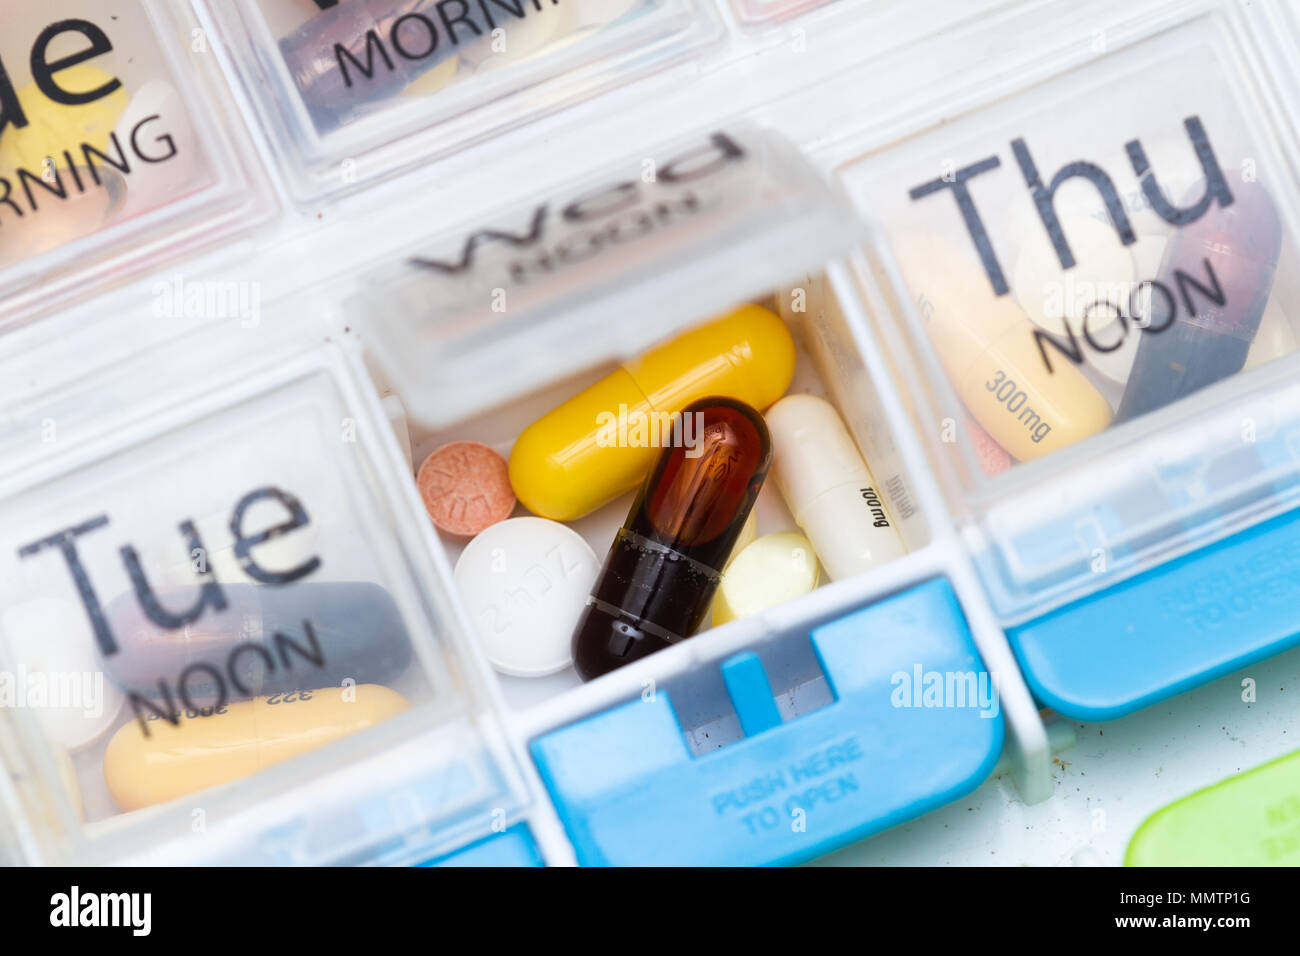 close up of an organizer for a daily regime of prescriptions drugs Stock Photo